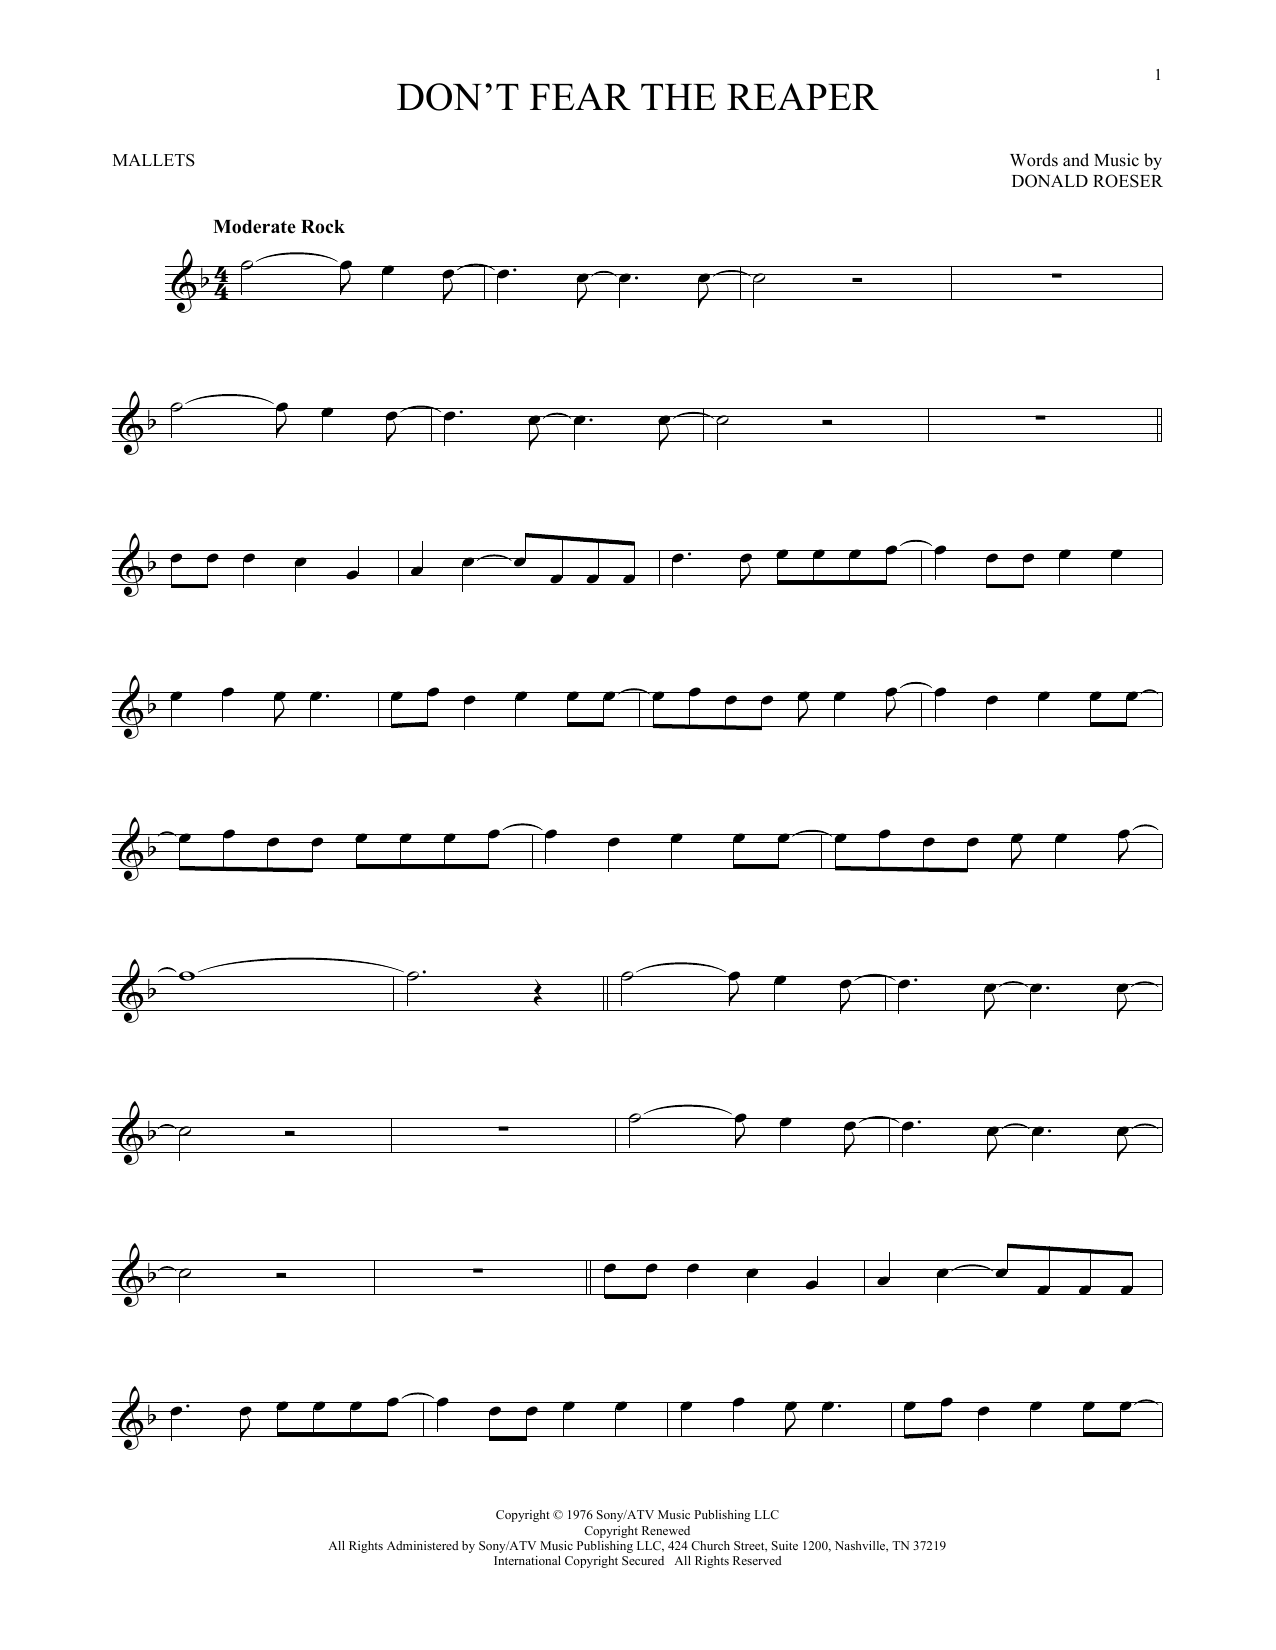 Blue Oyster Cult Don't Fear The Reaper sheet music notes printable PDF score